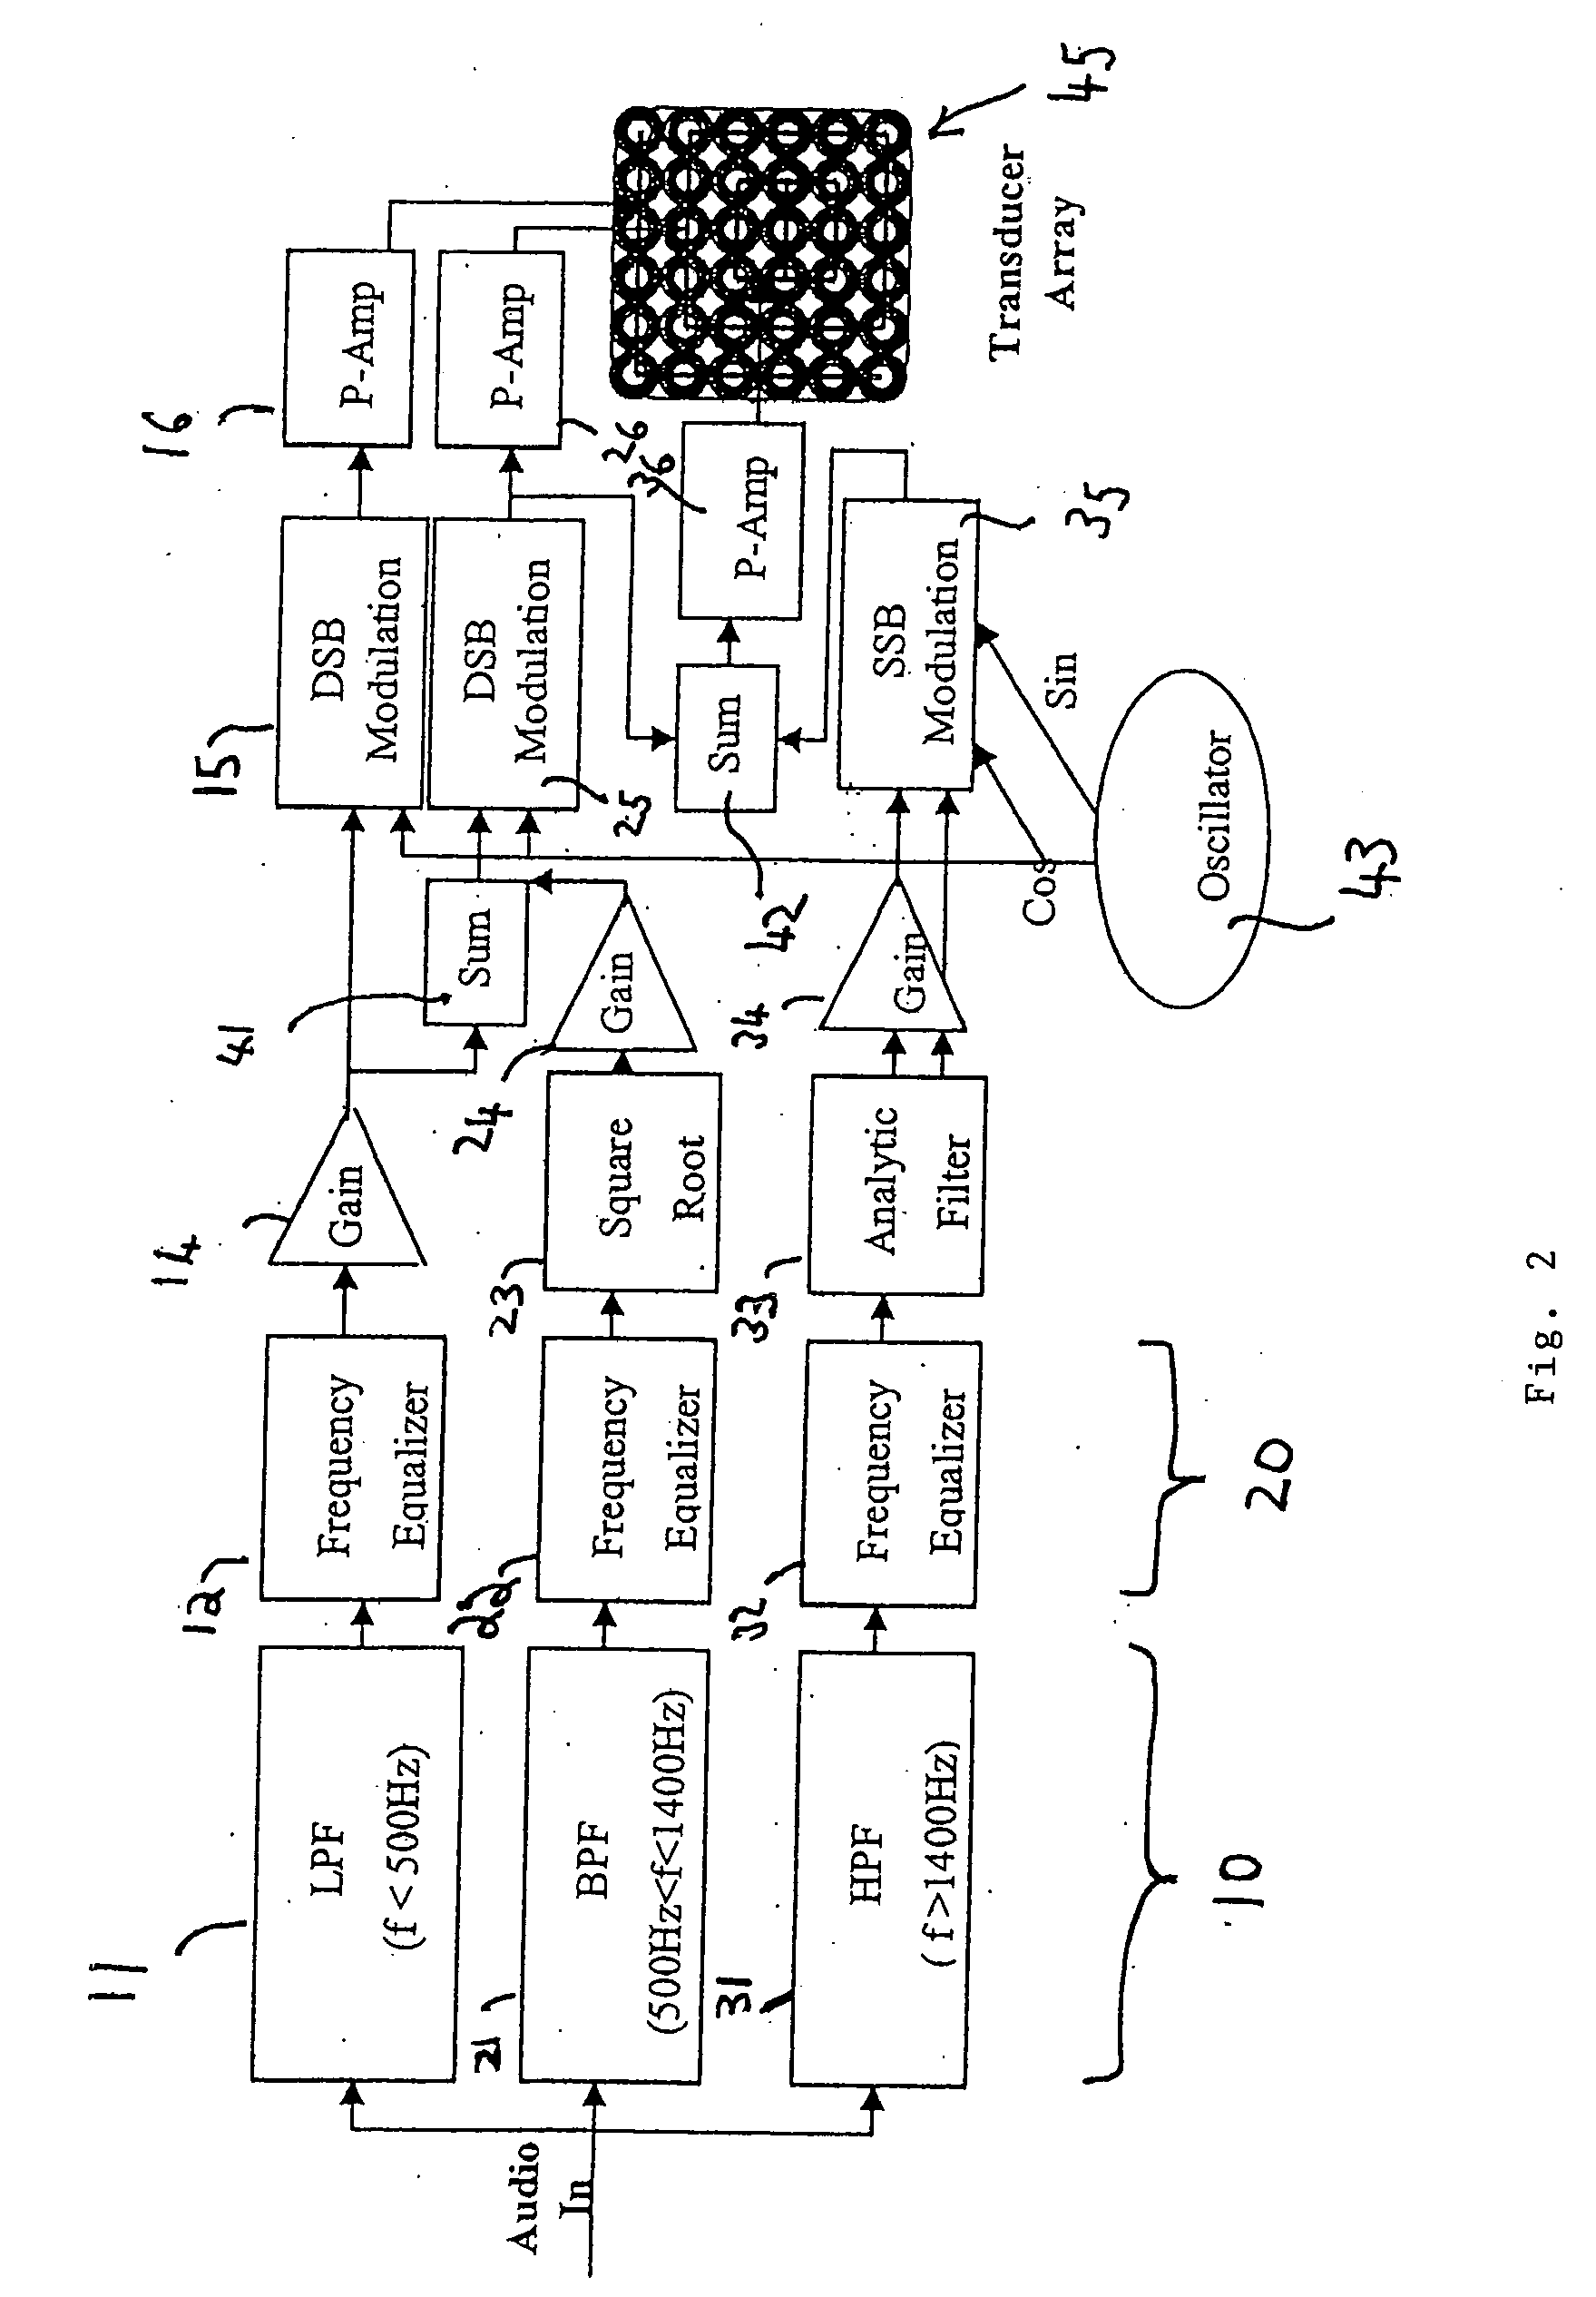 Method and apparatus to generate an audio beam with high quality